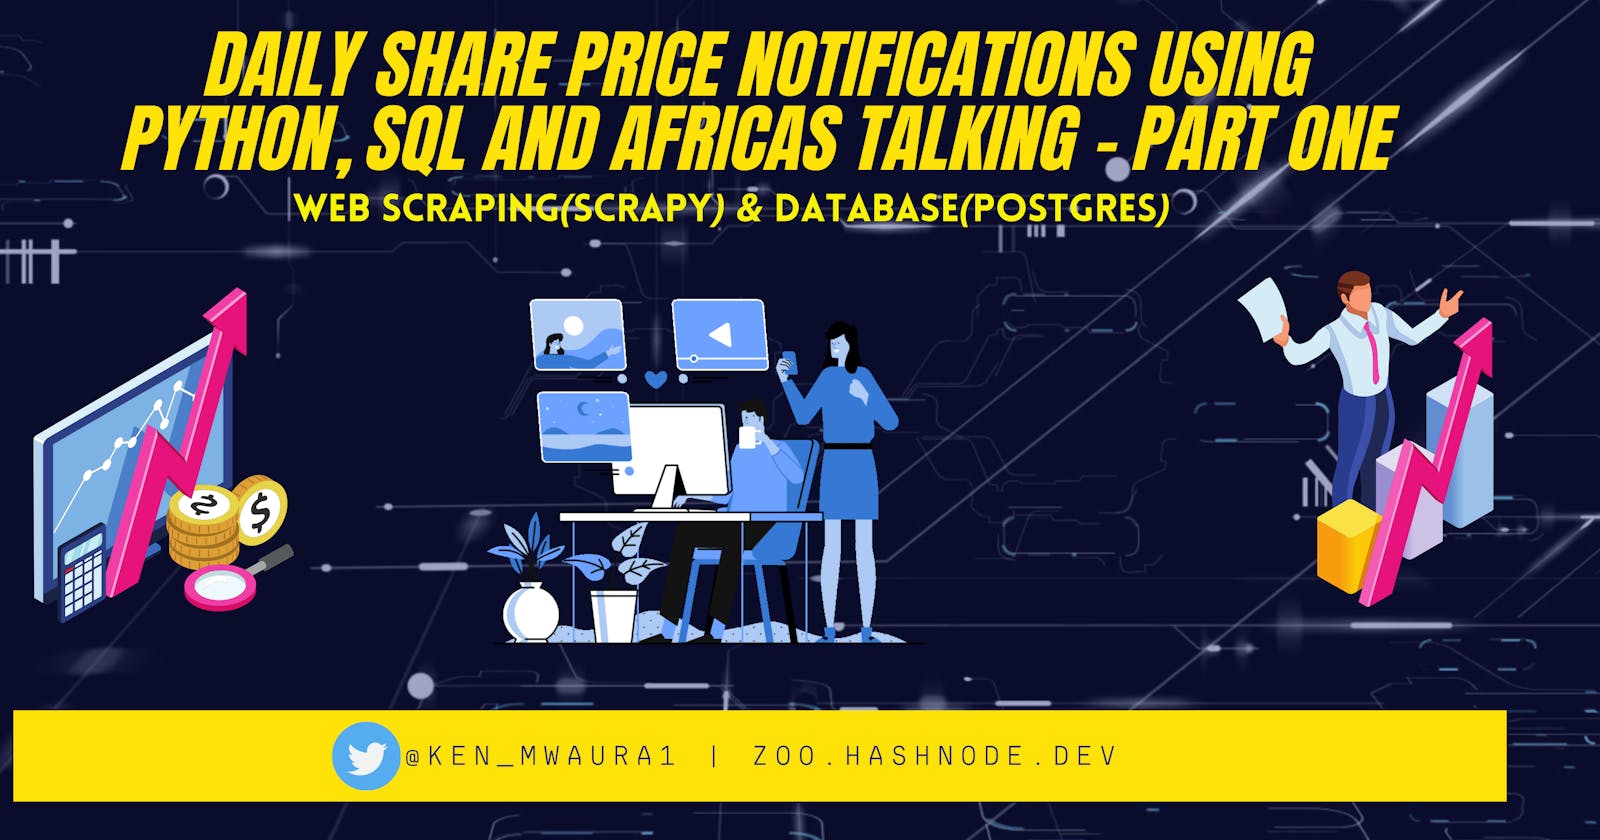 Daily Share Price Notifications using Python, SQL and Africas Talking - Part One